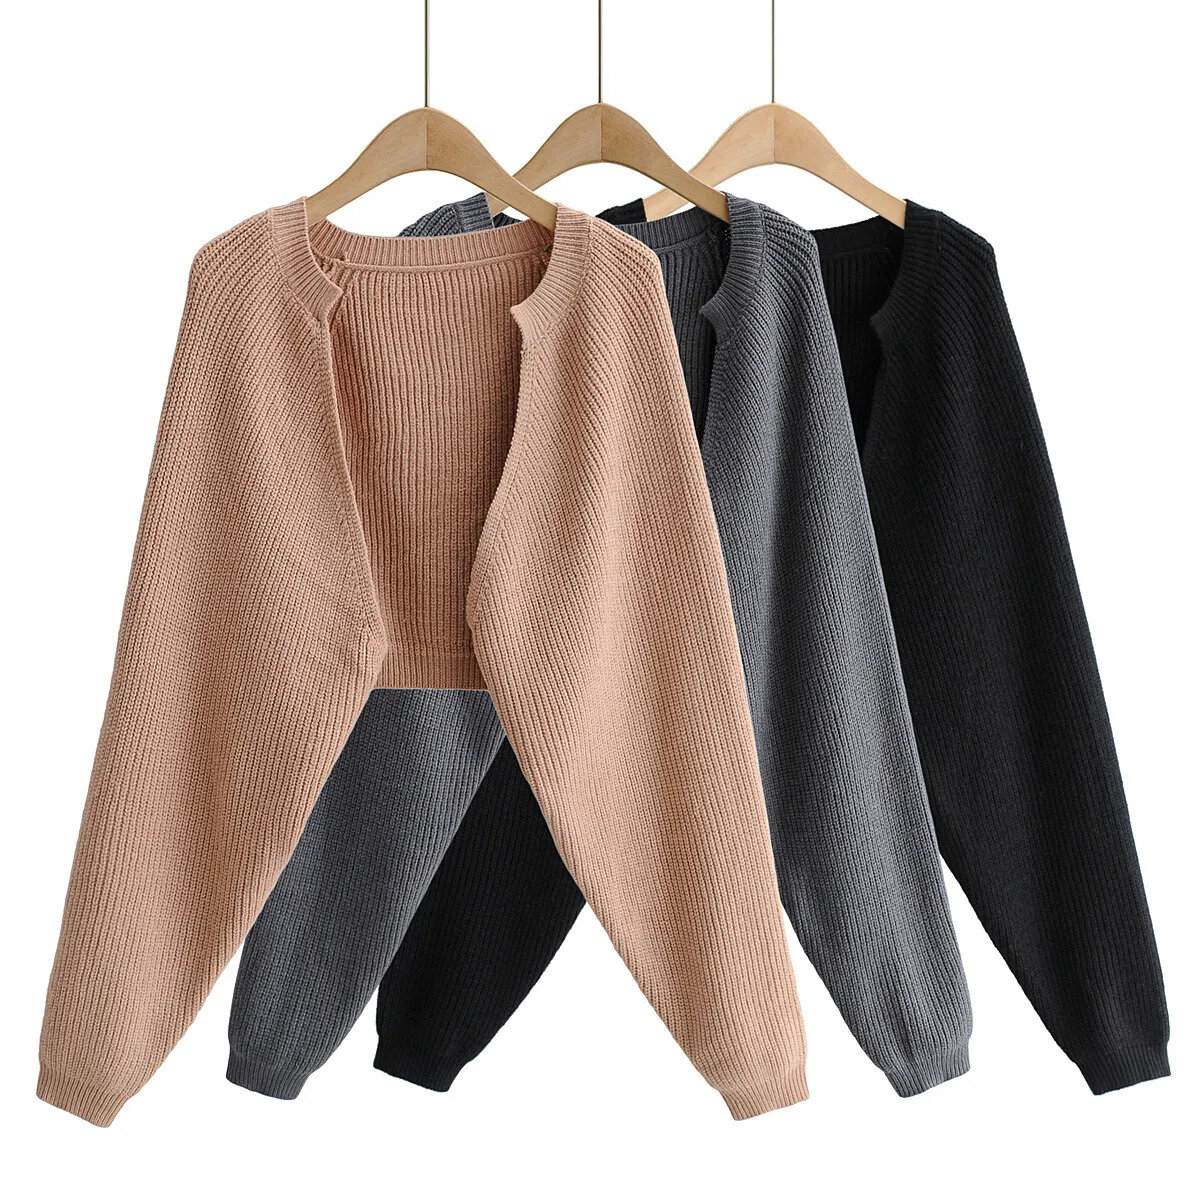 Sexy Cropped Cardigan Knitted Short Cardigan Sweaters For Women Fashion Cute Tops Korean Style Long Sleeve Top Batwing Sleeve